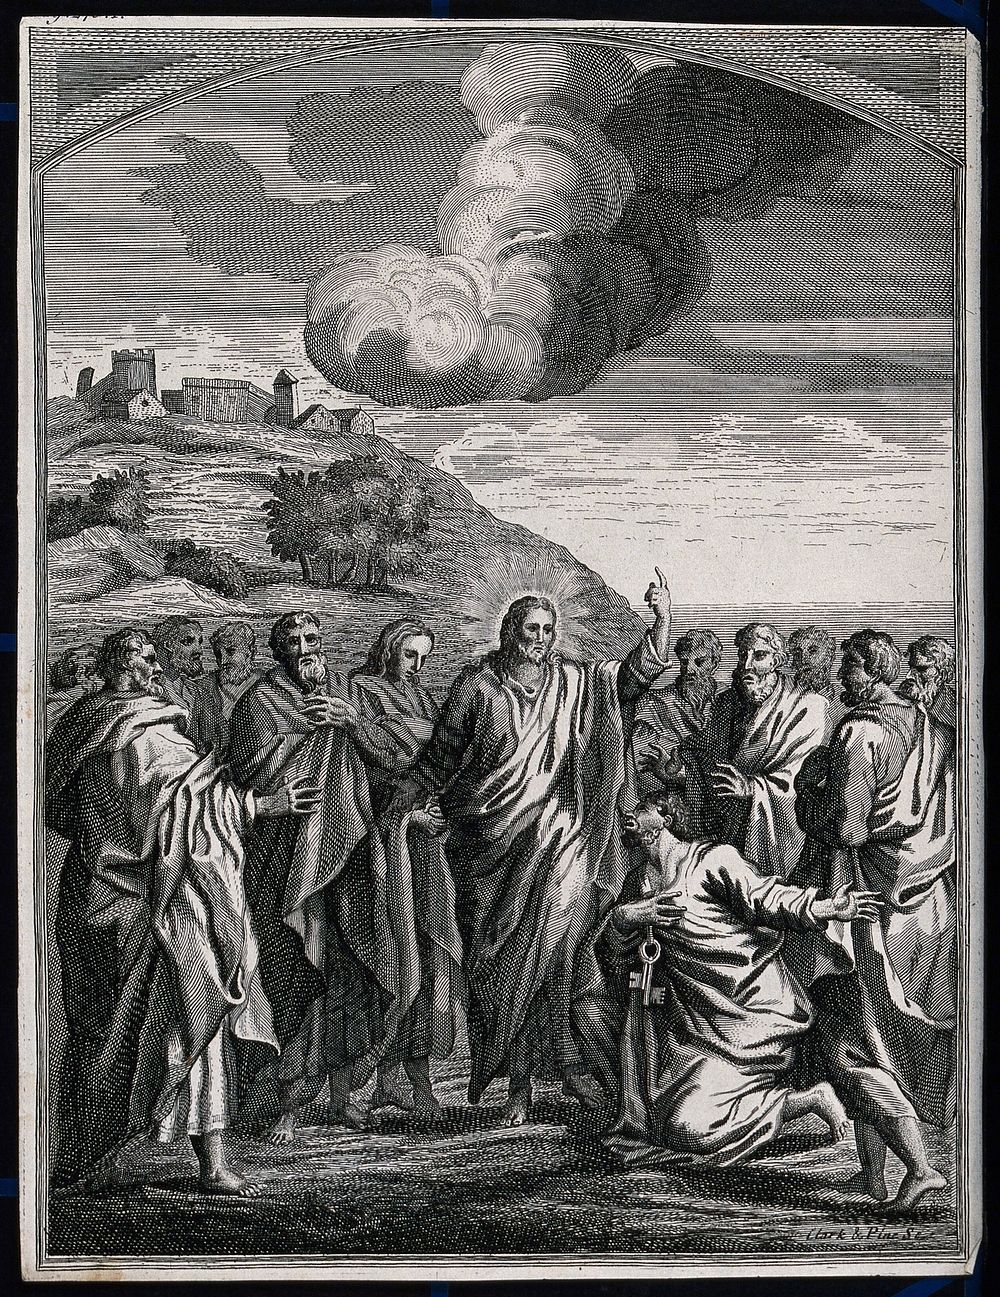 Jesus appoints Peter as head of the church. Engraving by Clark and Pine, ca. 1719.